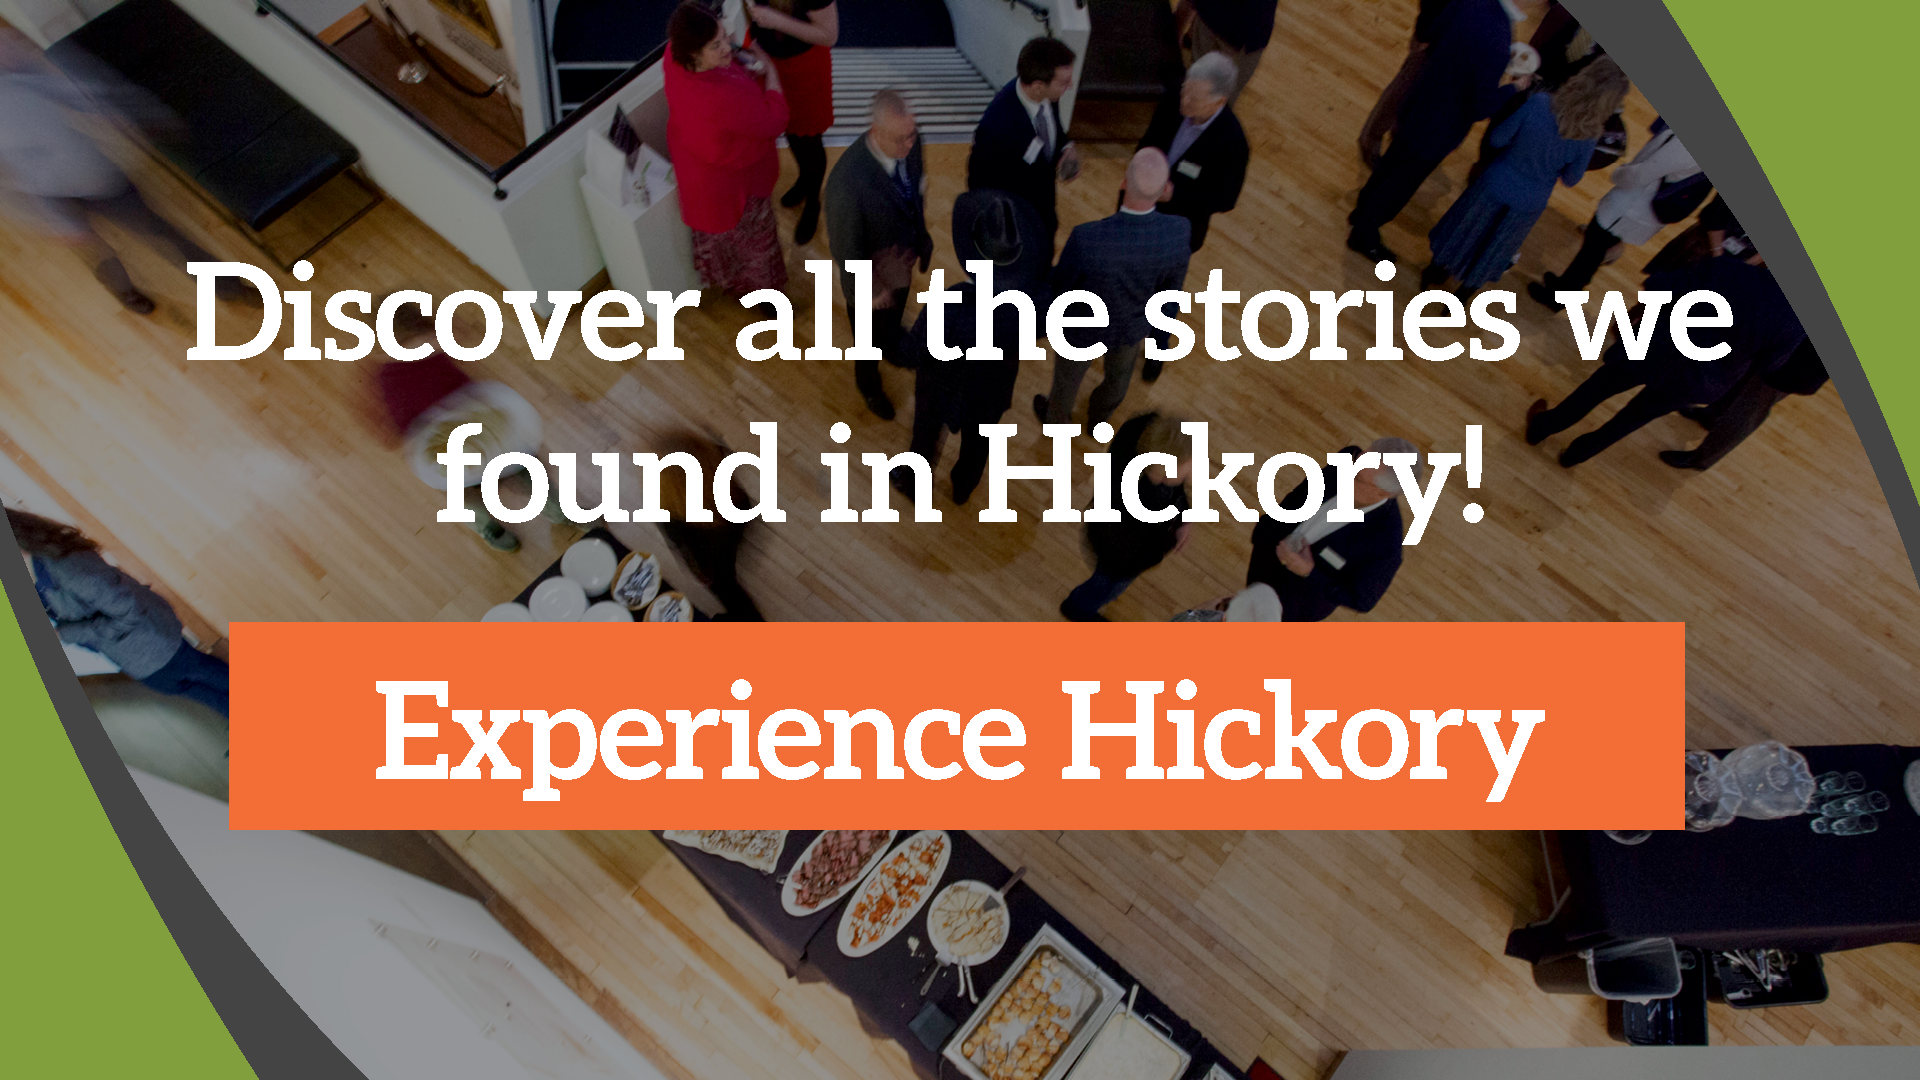 Learn about all the stories we found in Hickory - https://www.unctv.org/about/pressroom/pmnccareshickory